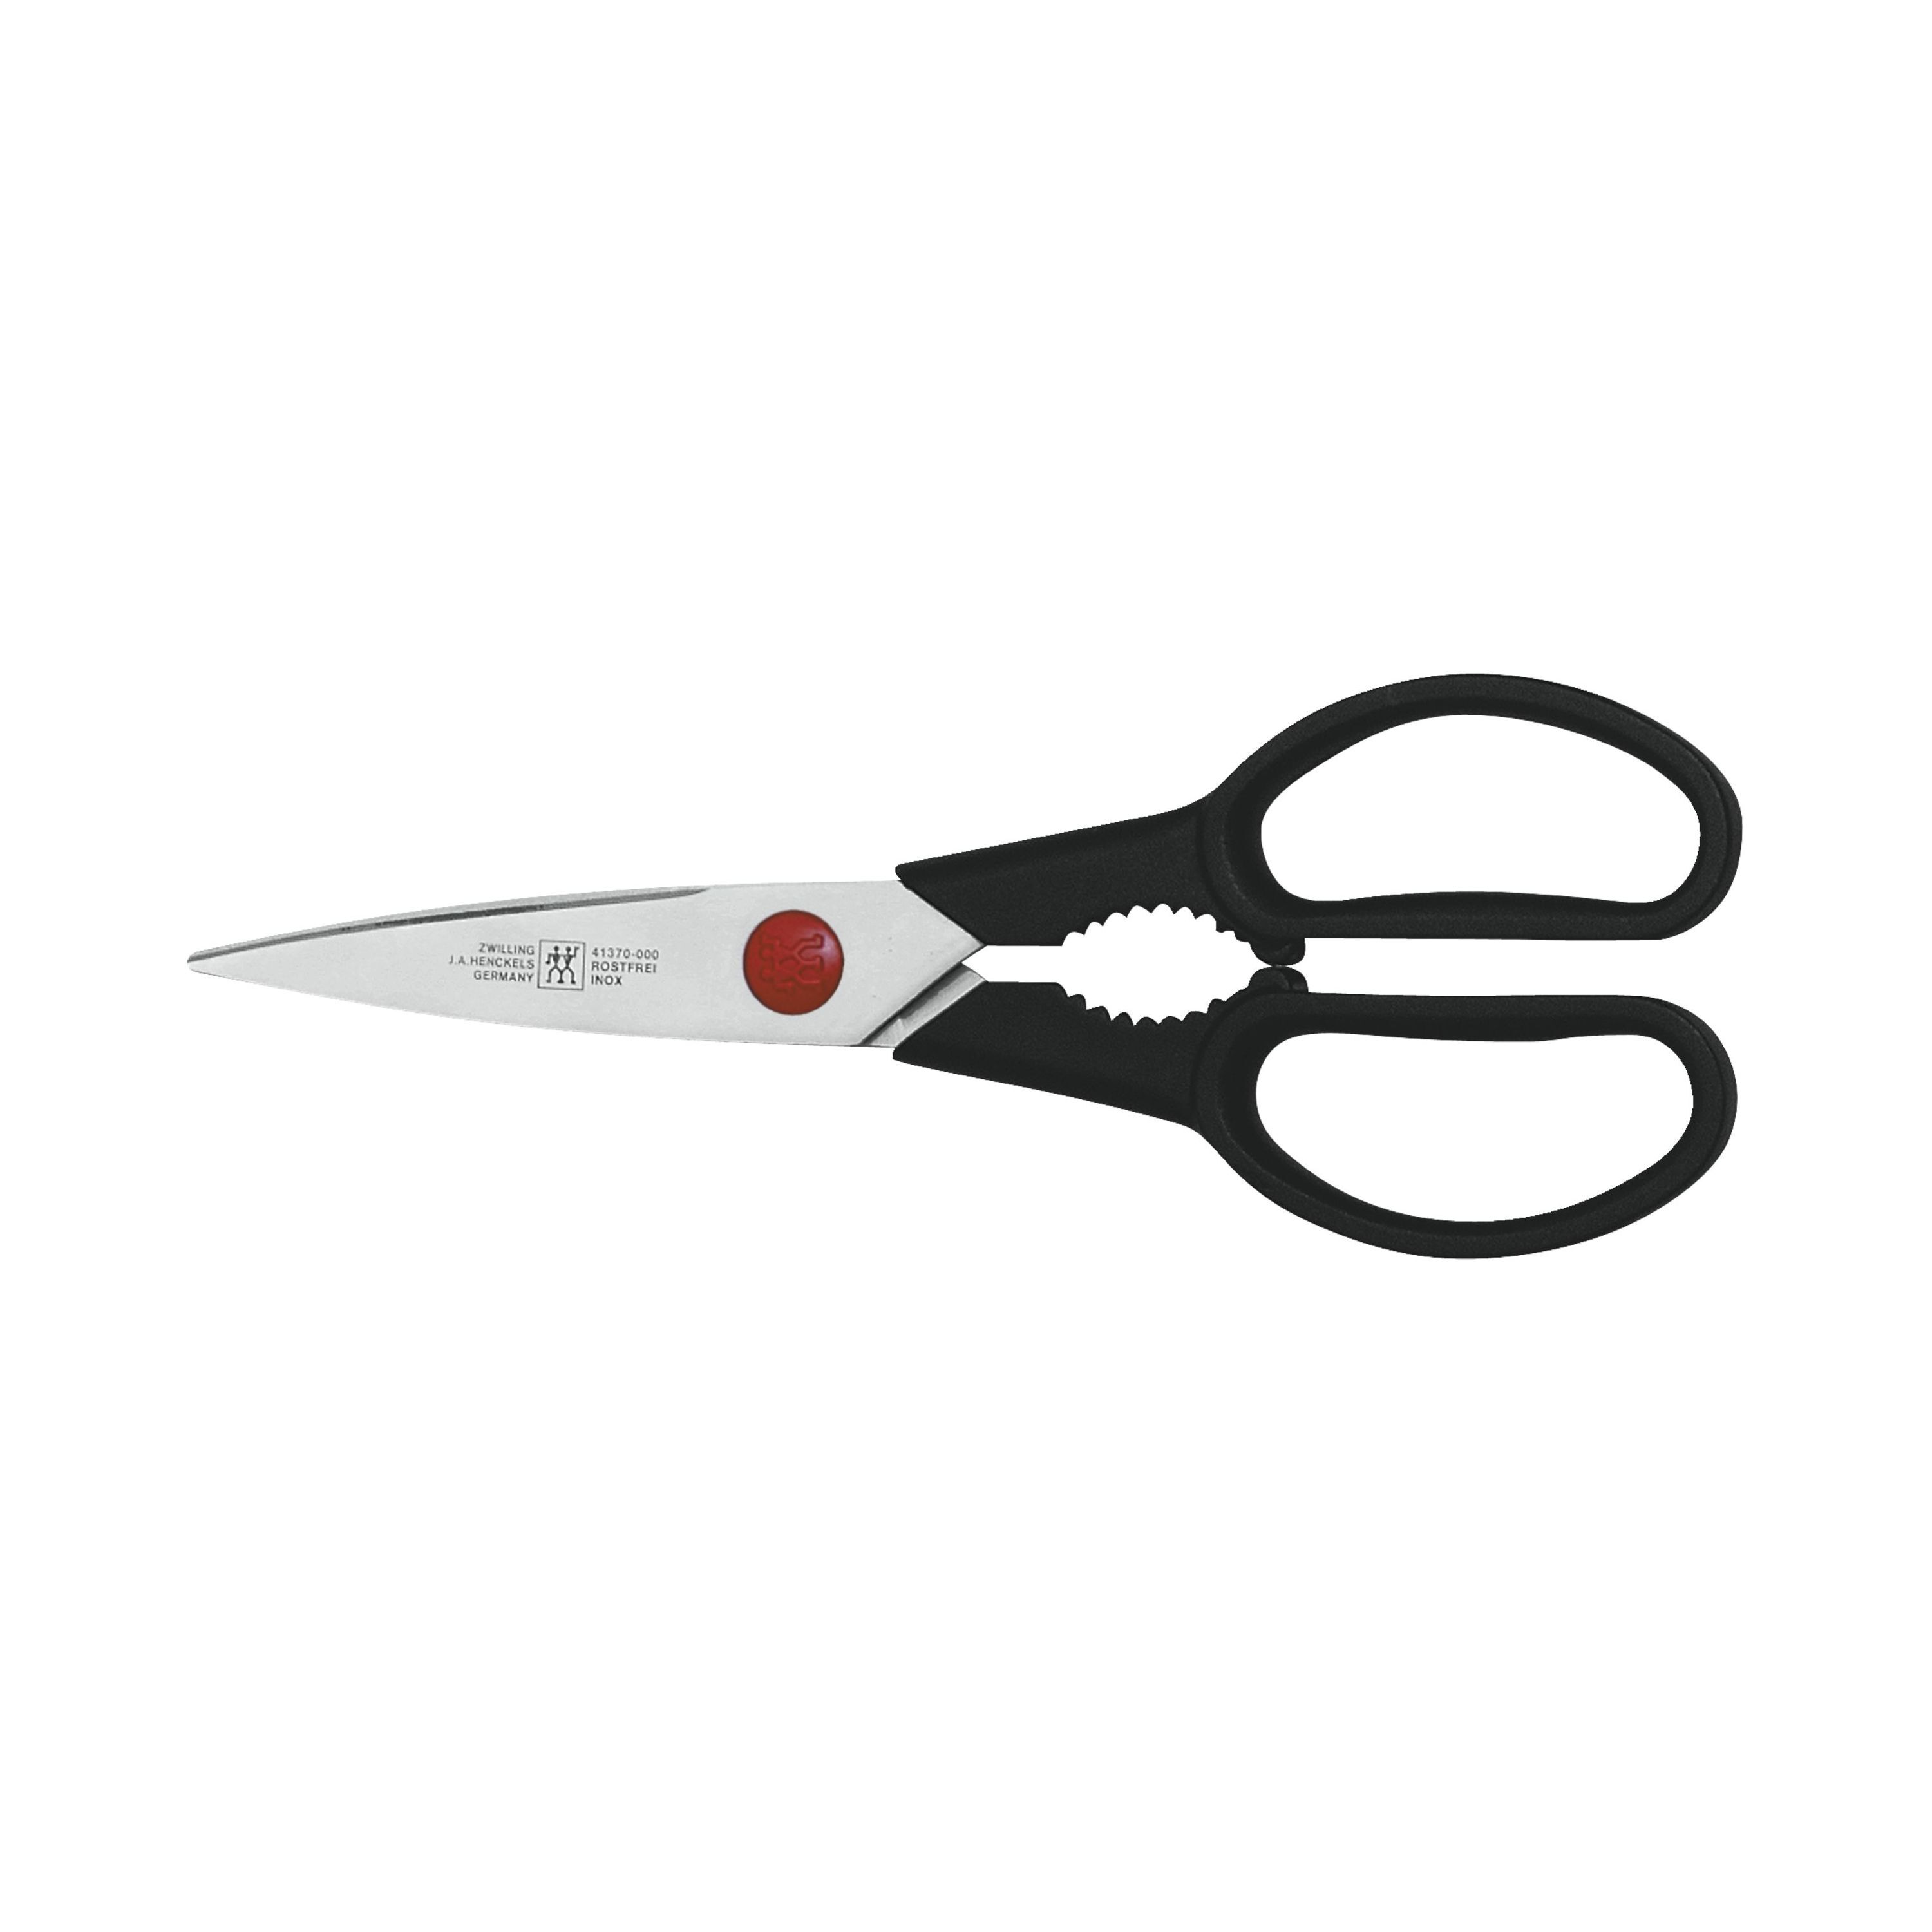 Red Handle for sale online Zwilling J.a Henckels Forged Multi-purpose Kitchen Shears 